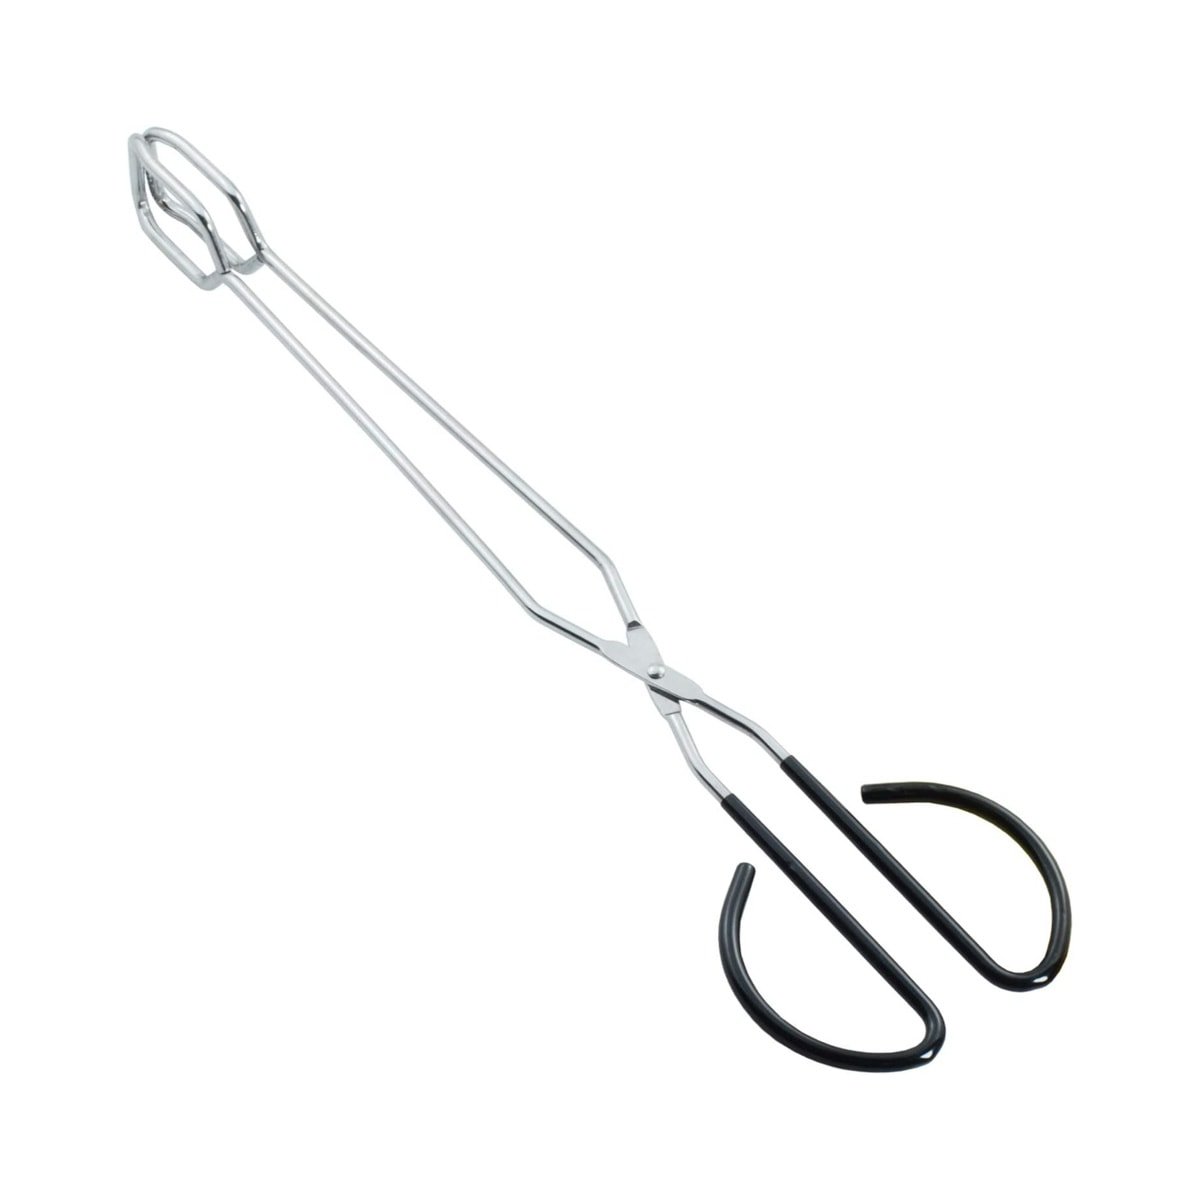 A long pair of stainless steel tongs with black rubber handles.